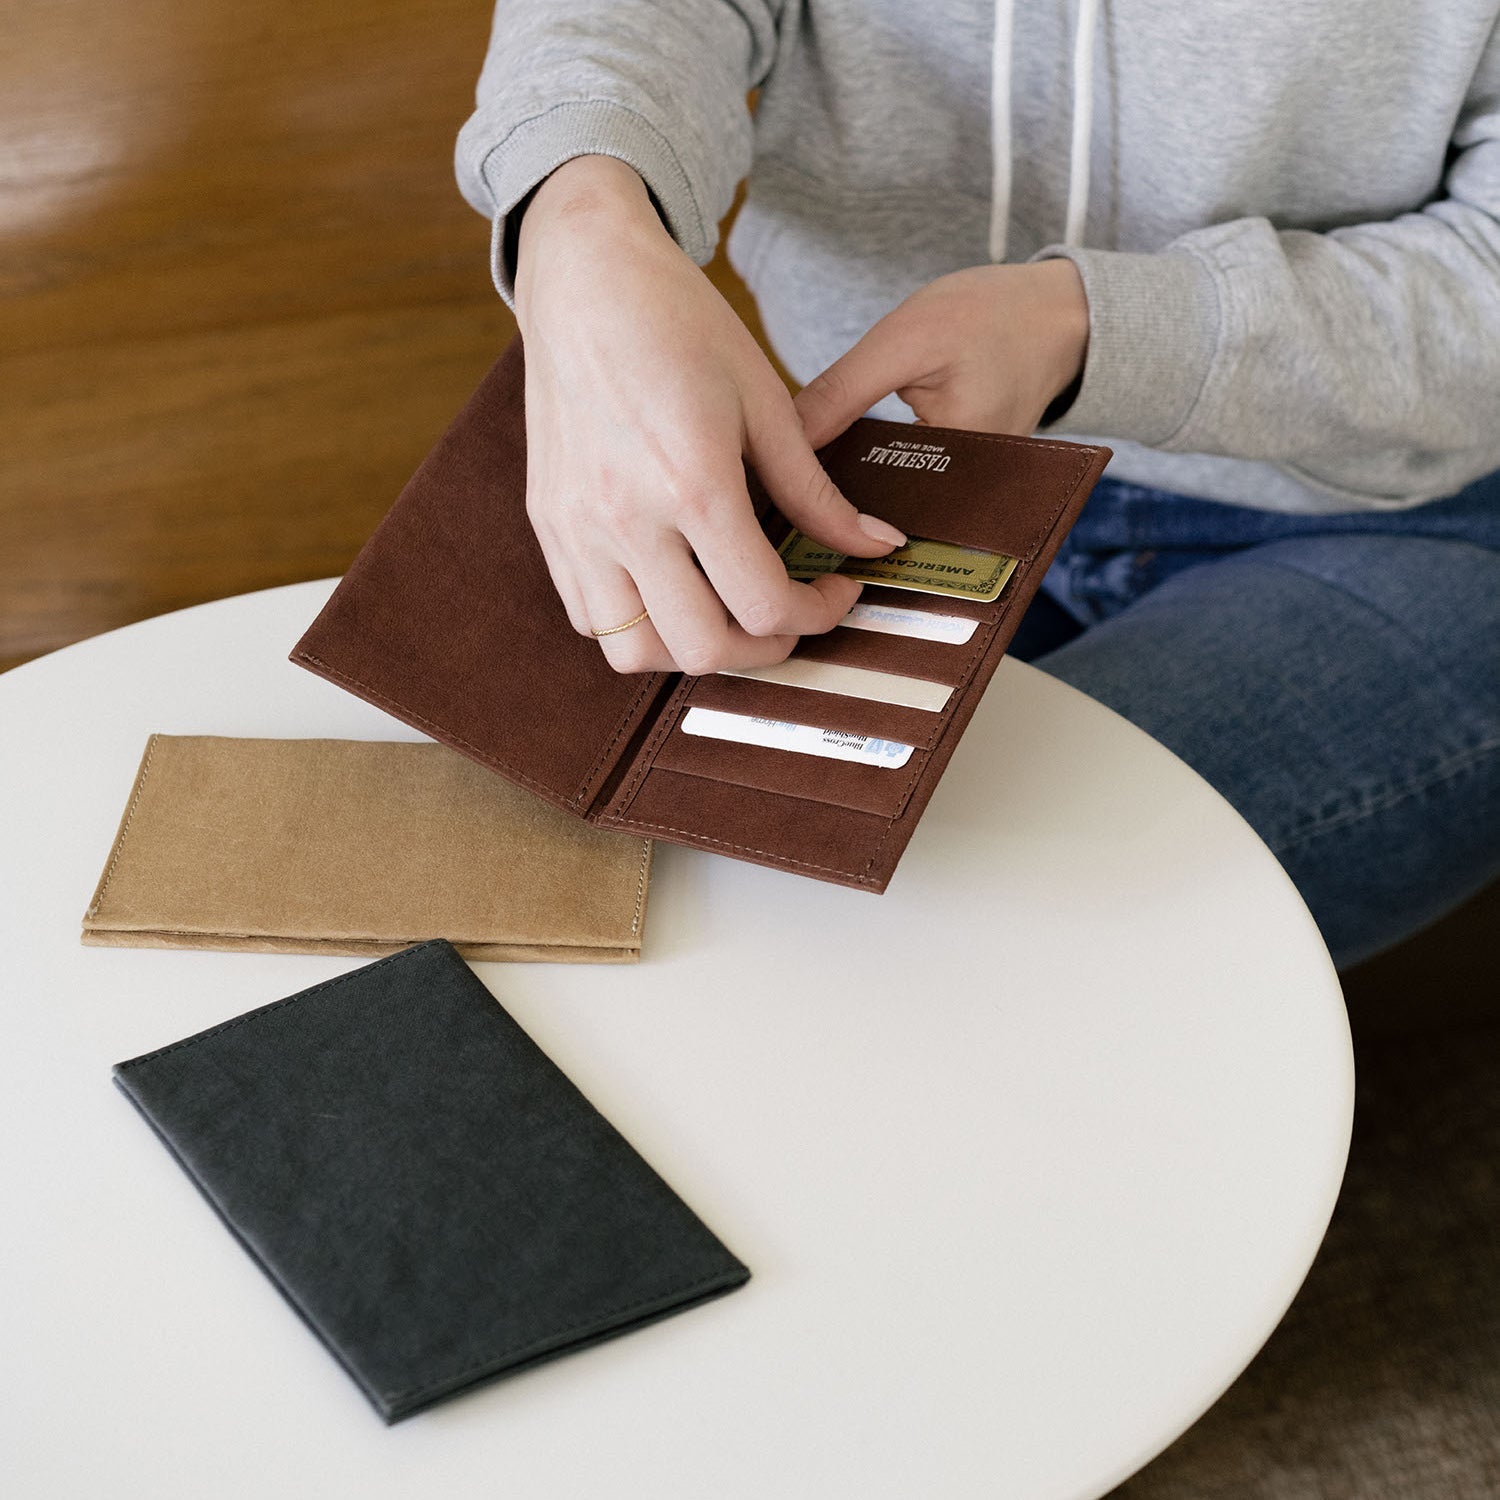 A woman in a grey sweatshirt and jeans is shown sitting at a round white table. On the table are two washable paper large wallets in tan and black. The woman is holding a washable paper wallet in dark brown in her hand and is inserting a credit card into one of the 5 card slots.